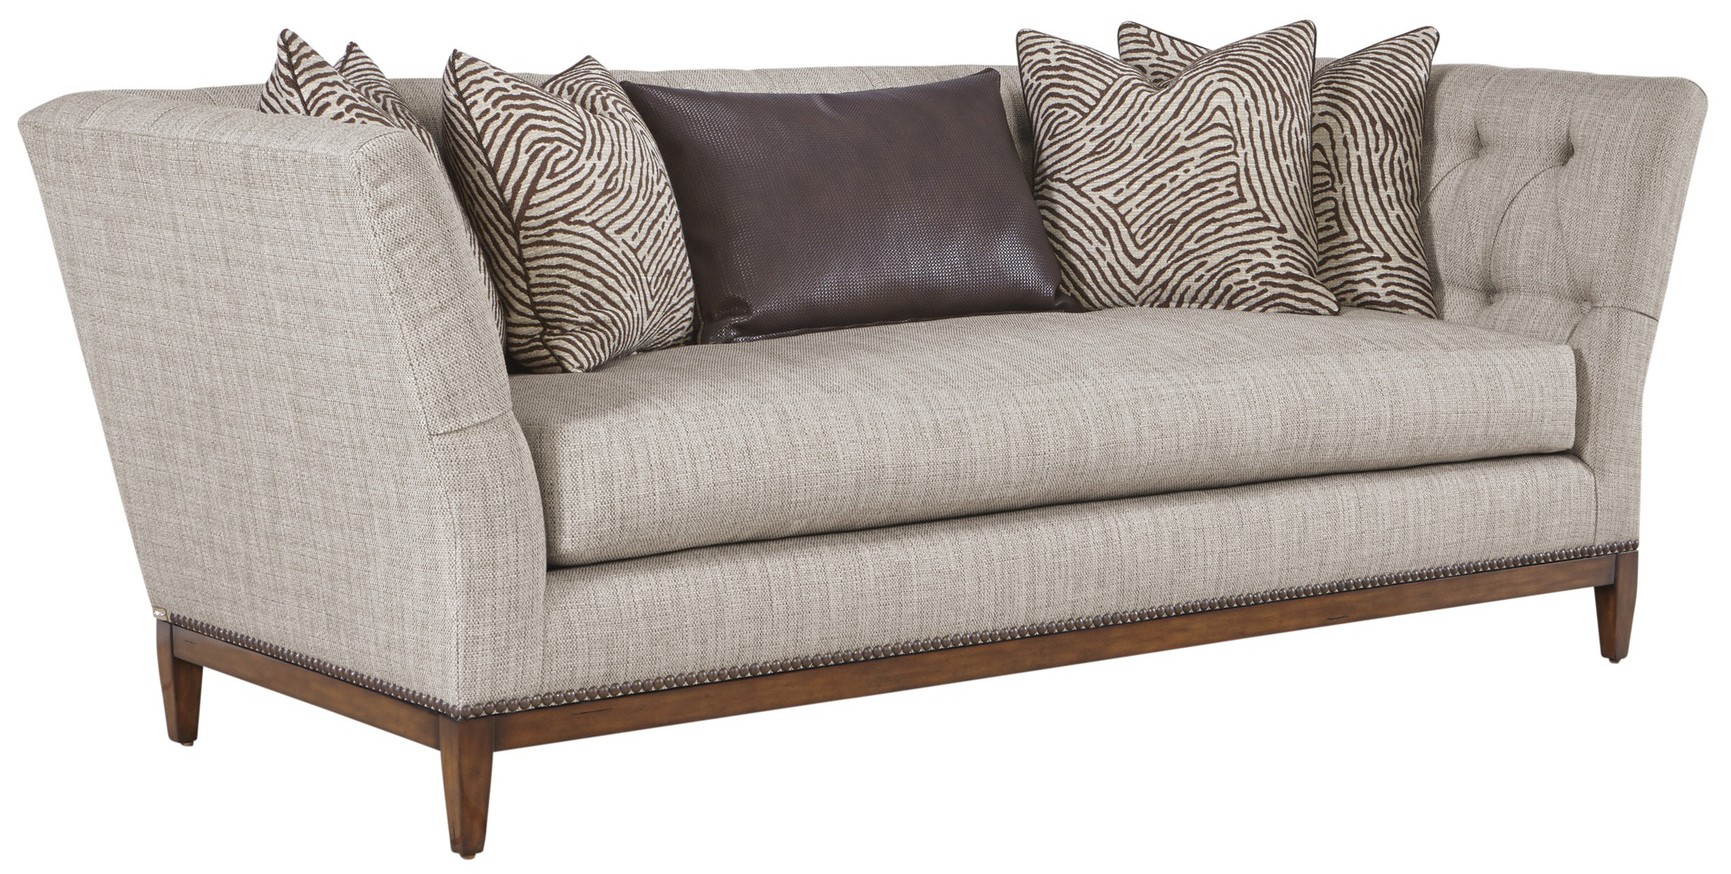 SOFA, COUCH & LOVESEAT Sofa 6076 from our modern Dakota collection